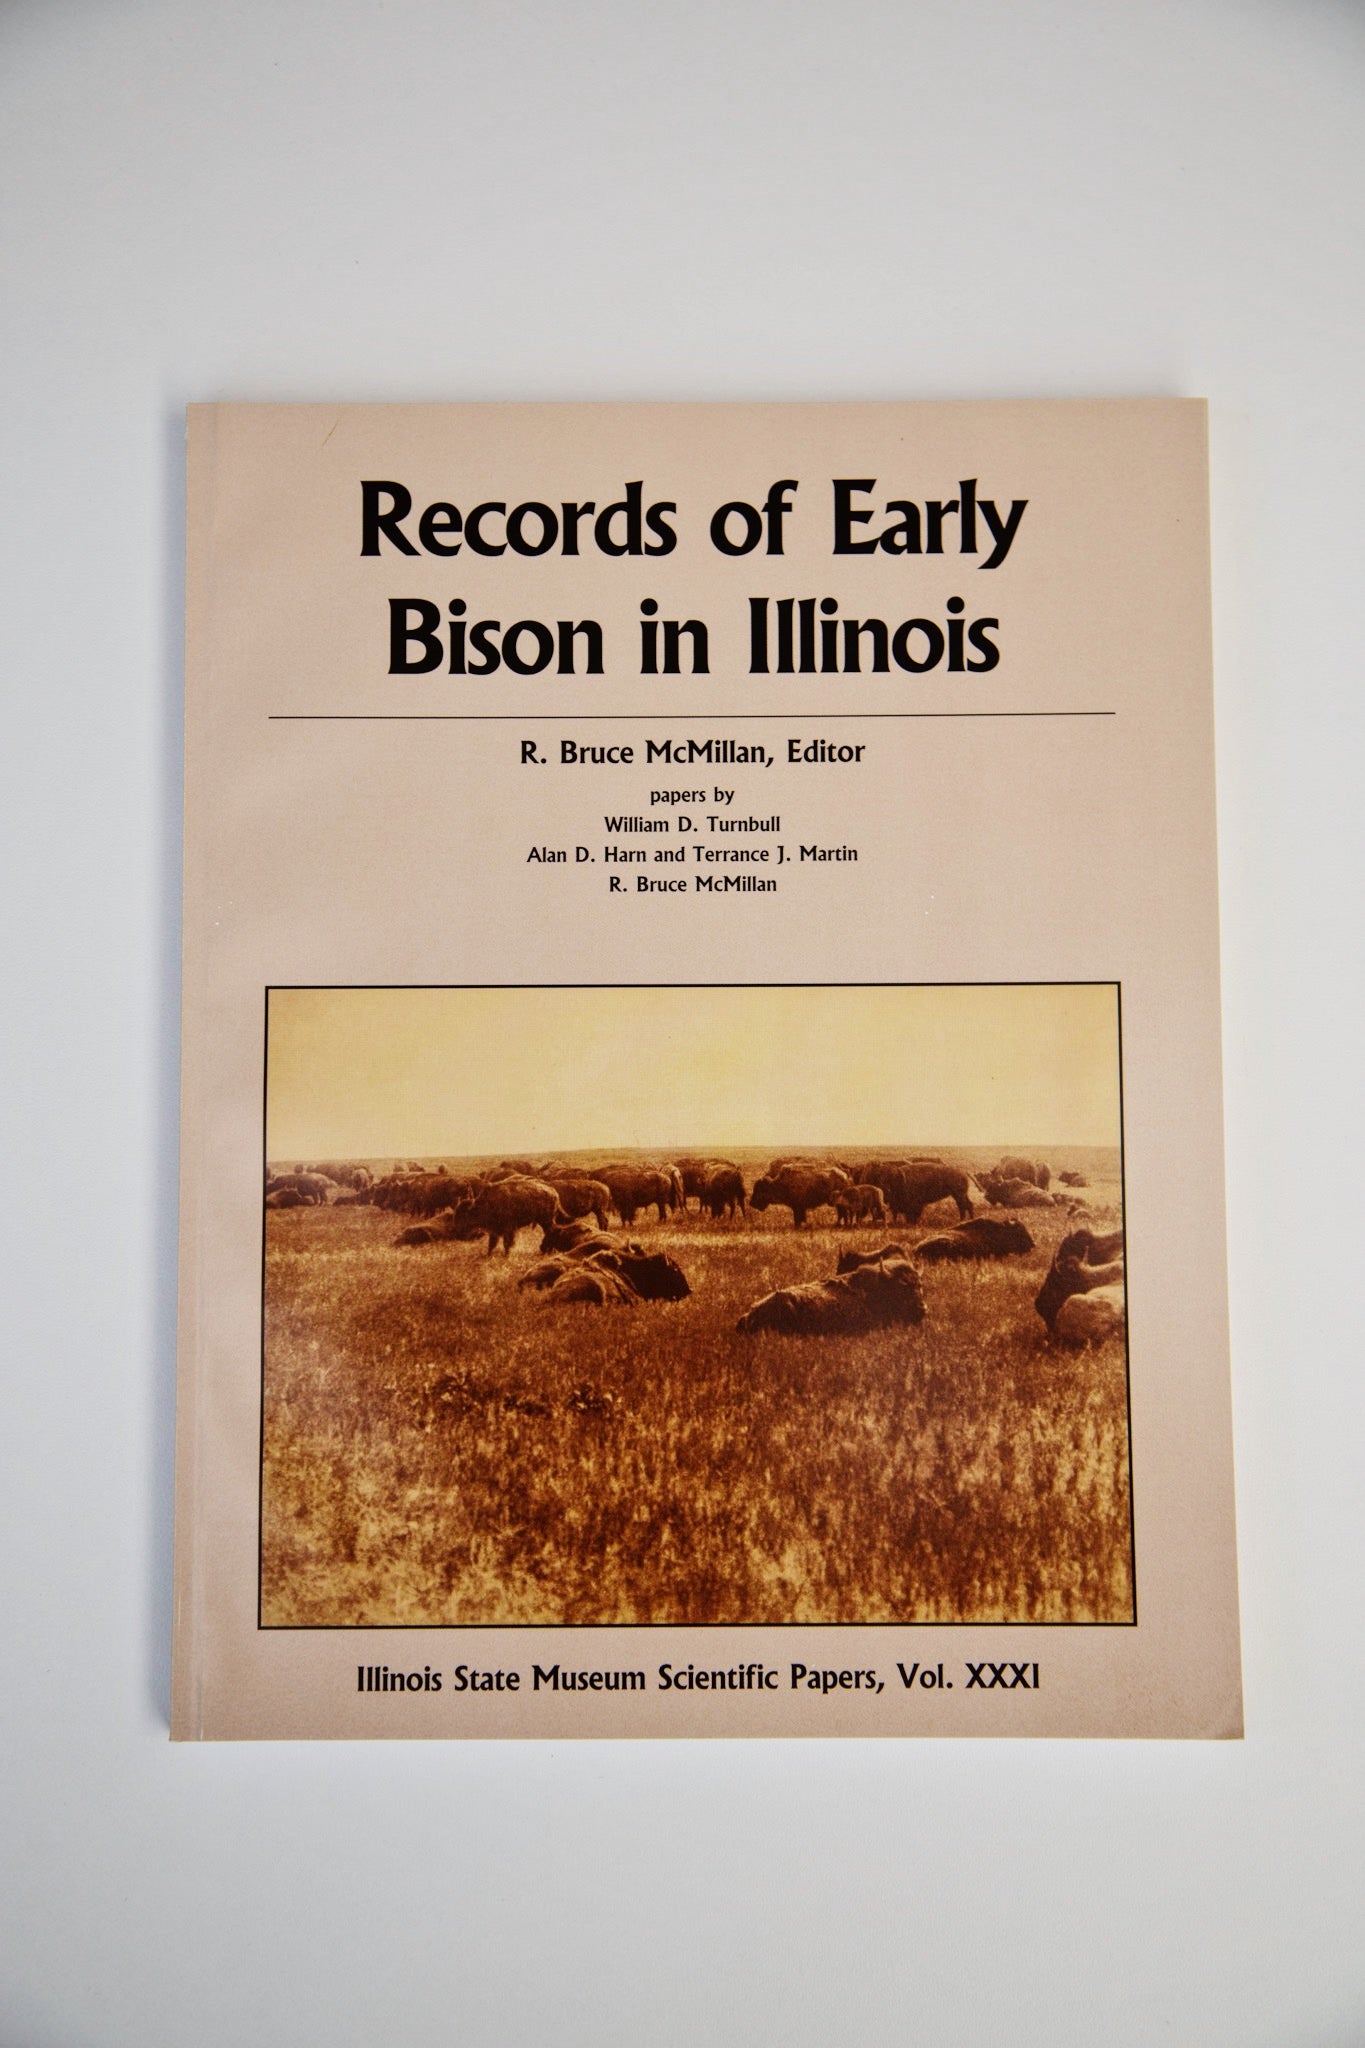 The cover photo of the book “Records of Early Bison in Illinois”.